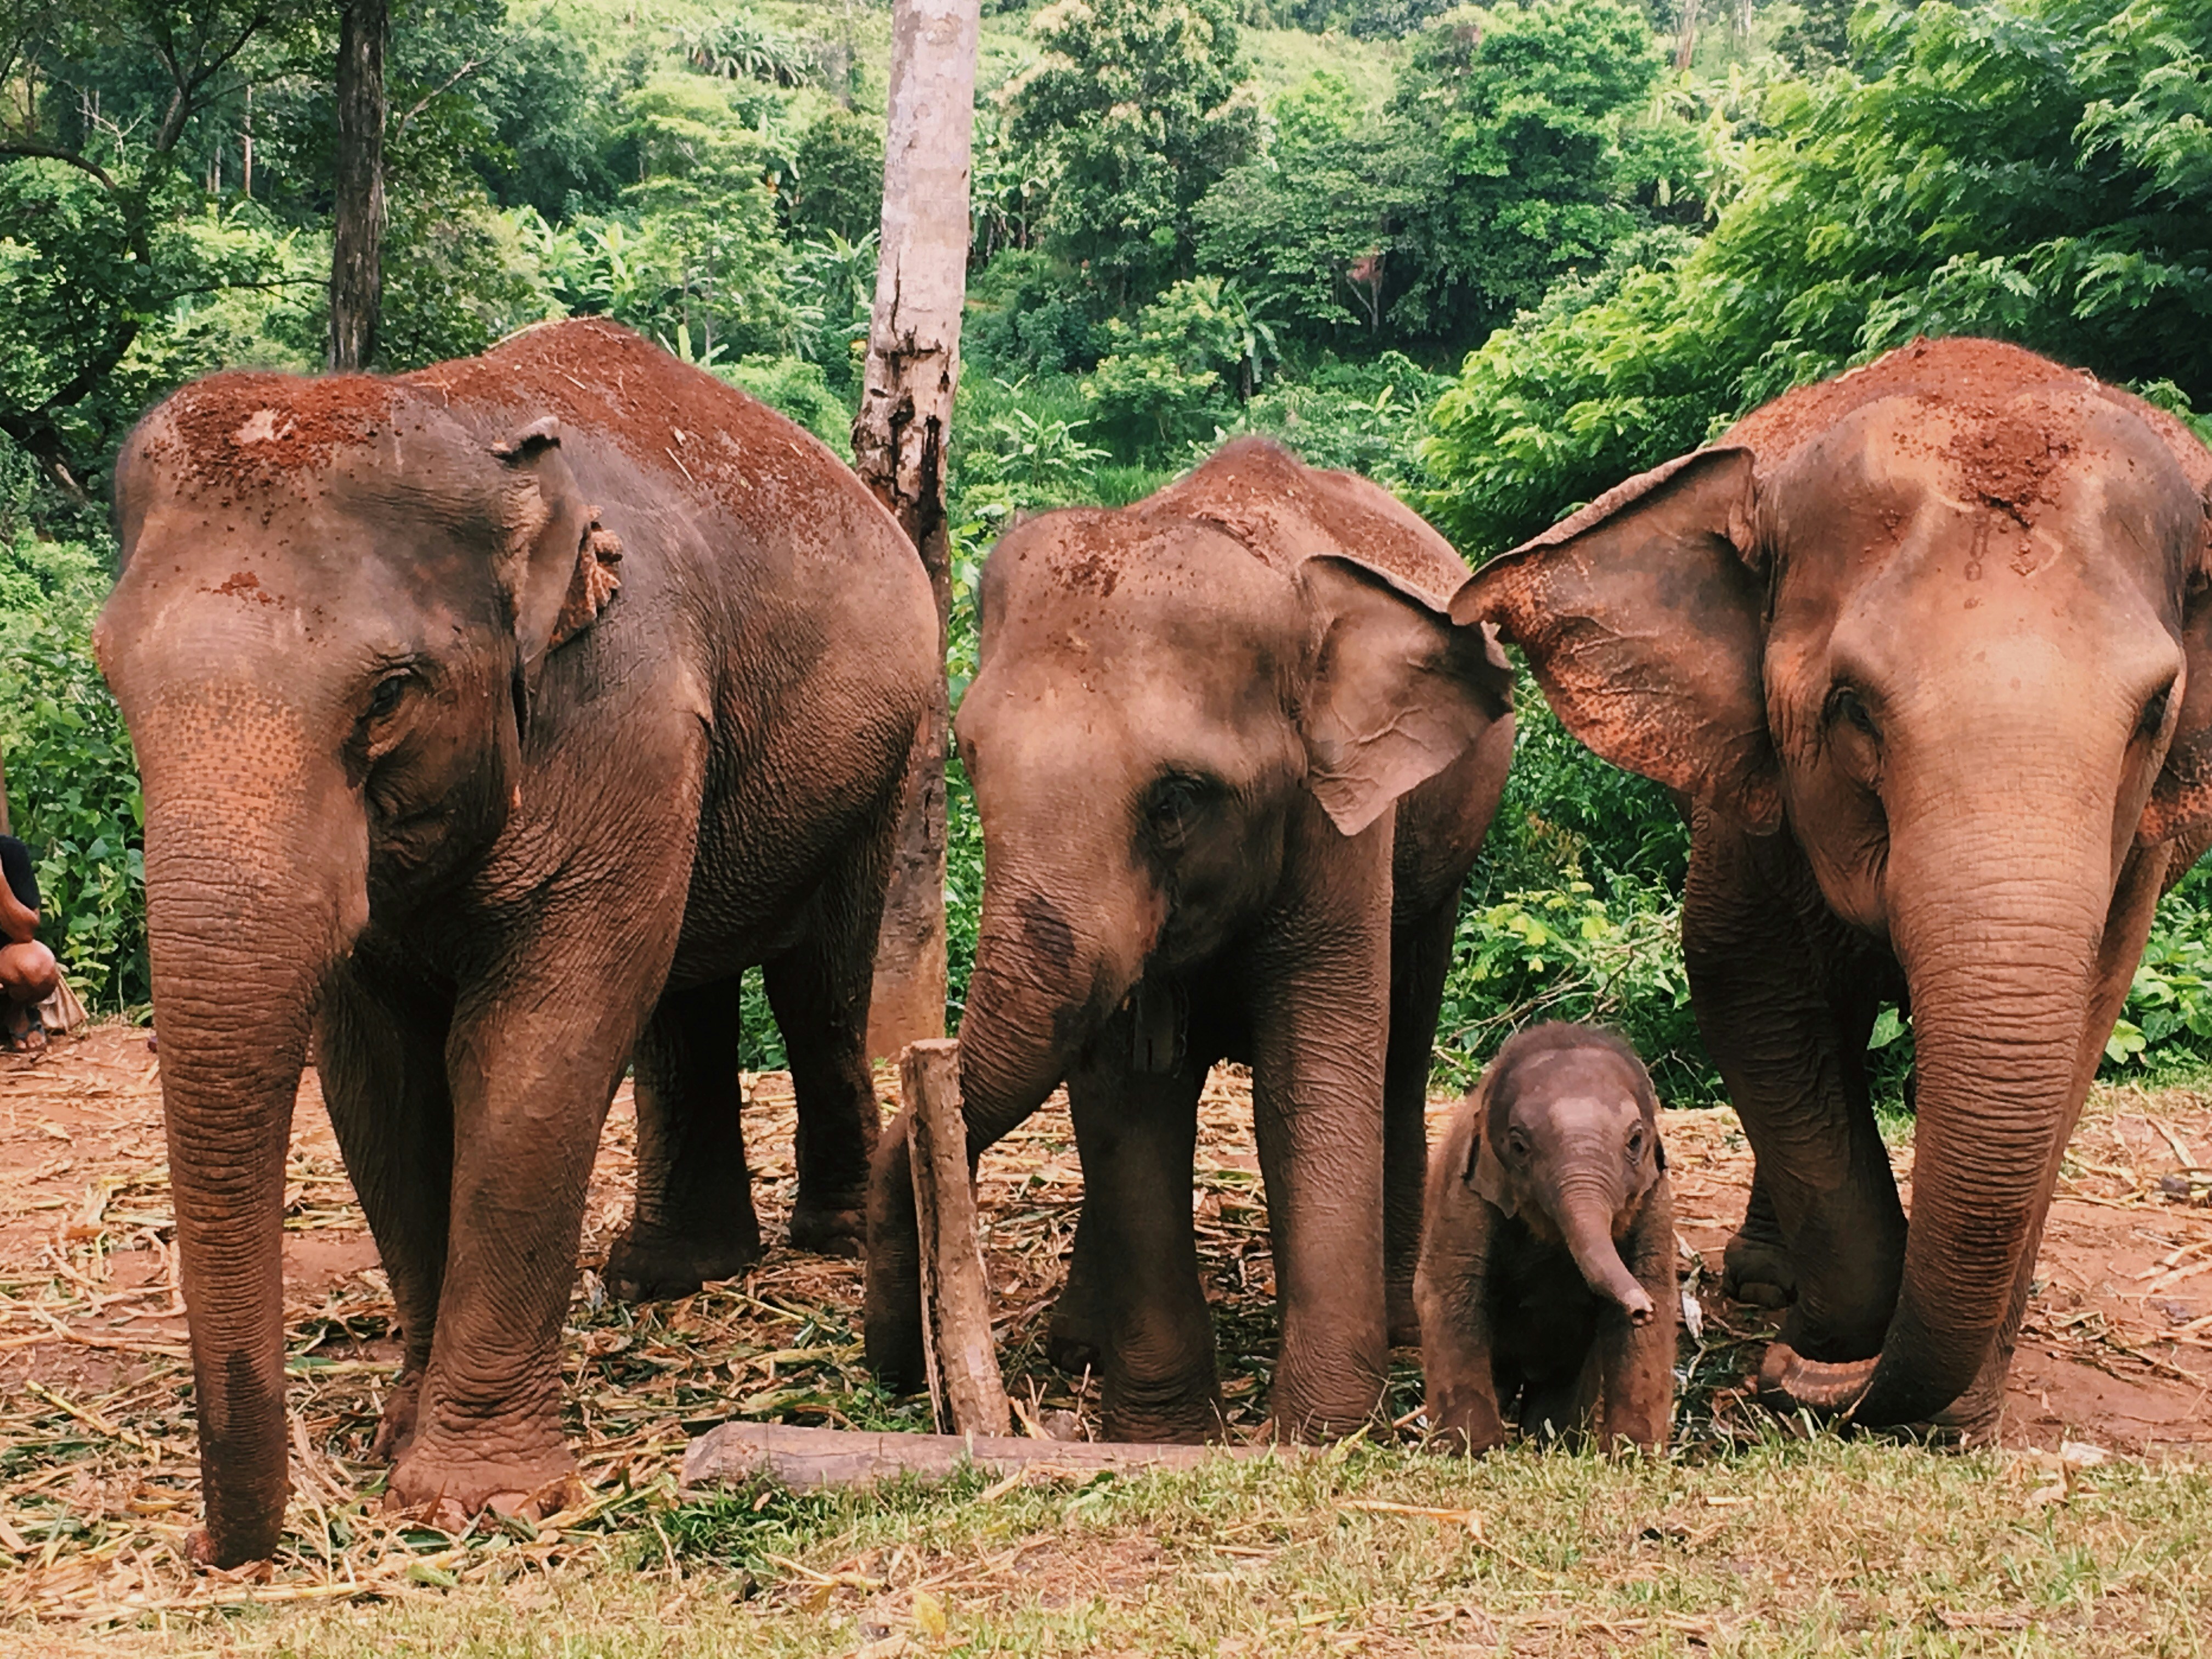 This was taken in the national park just outside Chiang Mai. These gentle giants allowed us to visit them in their natural habitat, where we were lucky enough to interact with a one month old baby elephant.